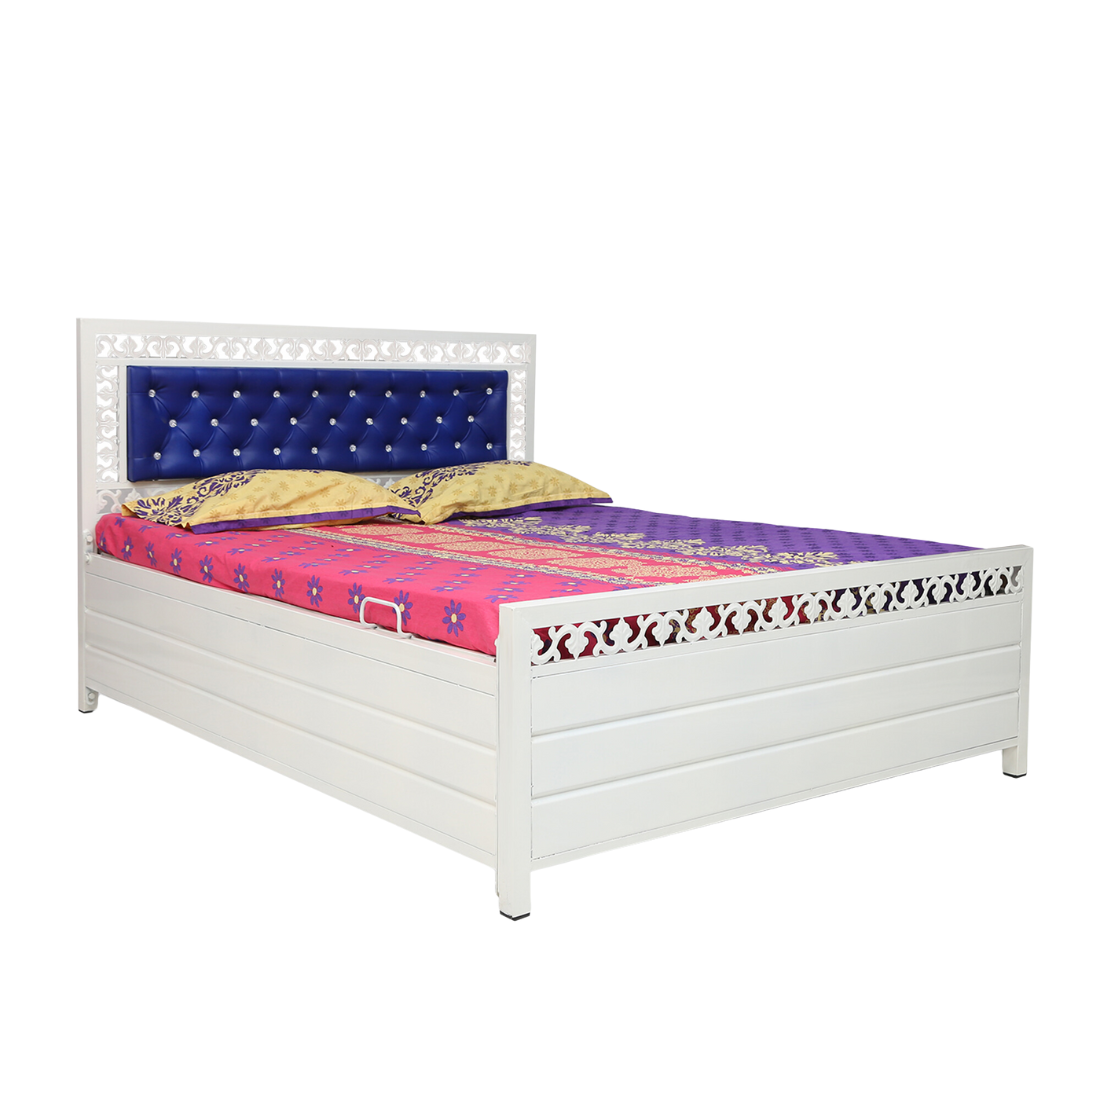 Cuba Hydraulic Storage King Metal Bed with Blue Cushion Headrest (Color - White)